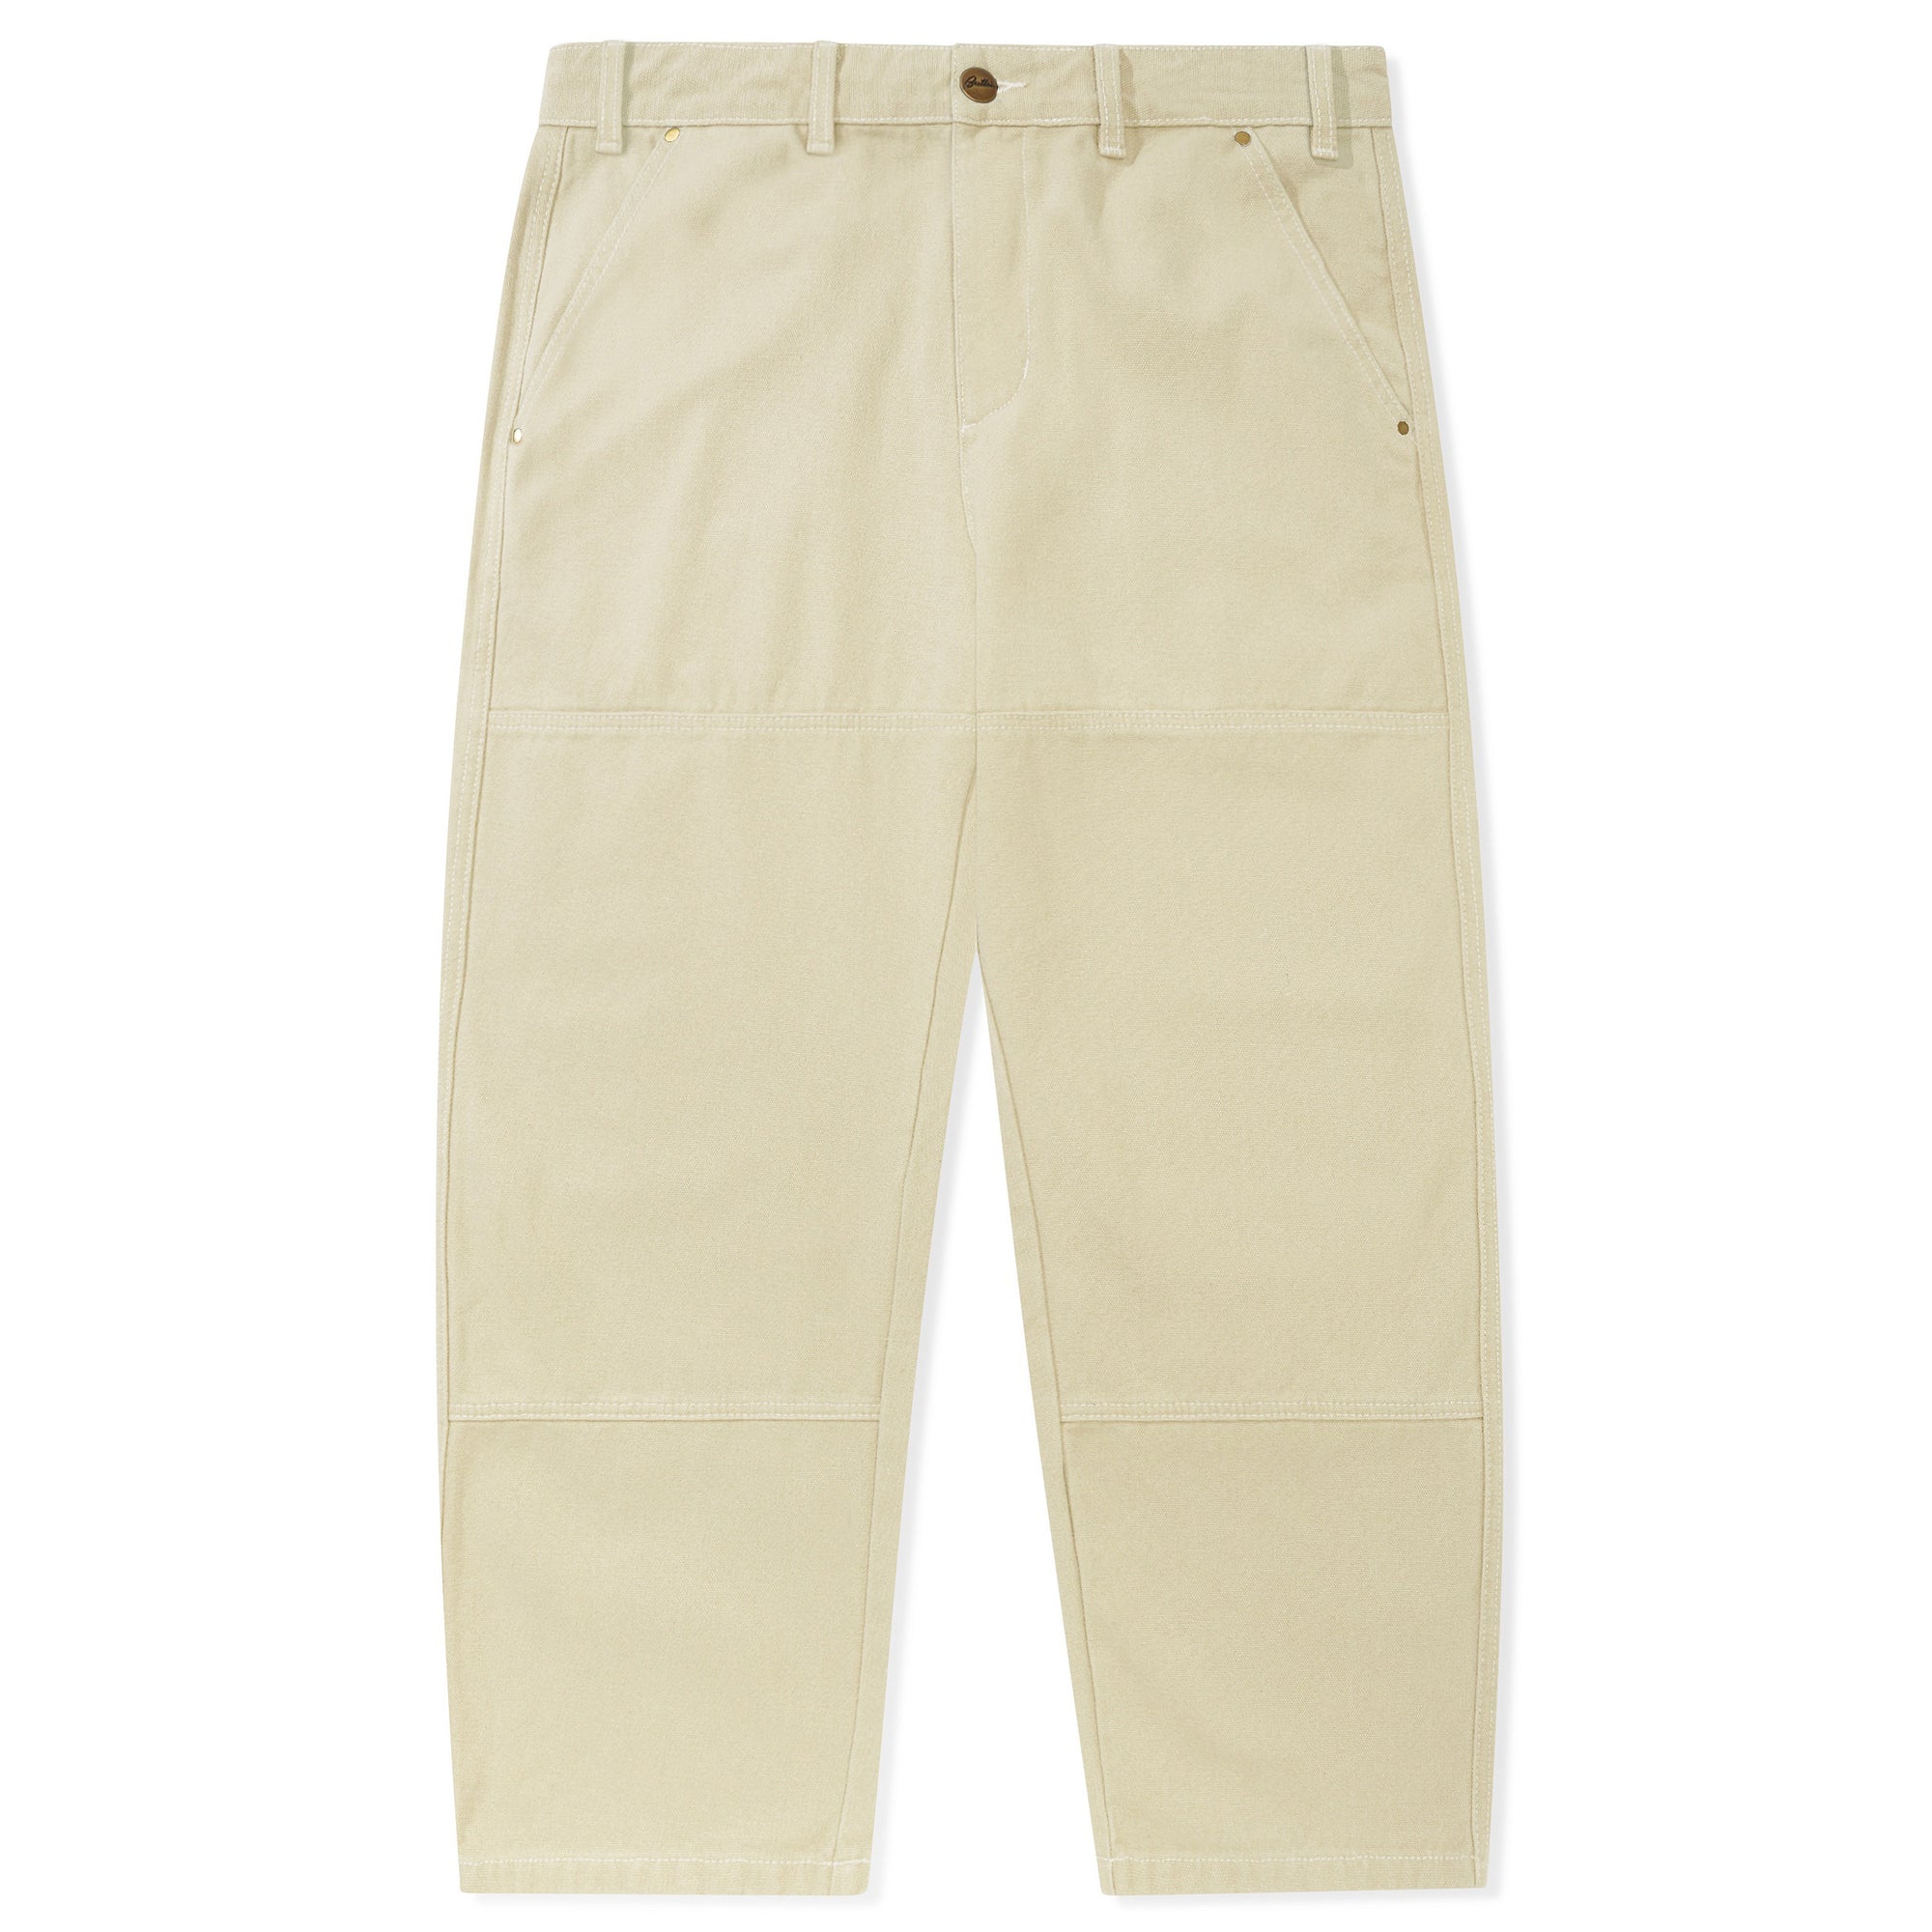 Butter Goods Work Double Knee Pants Washed Khaki